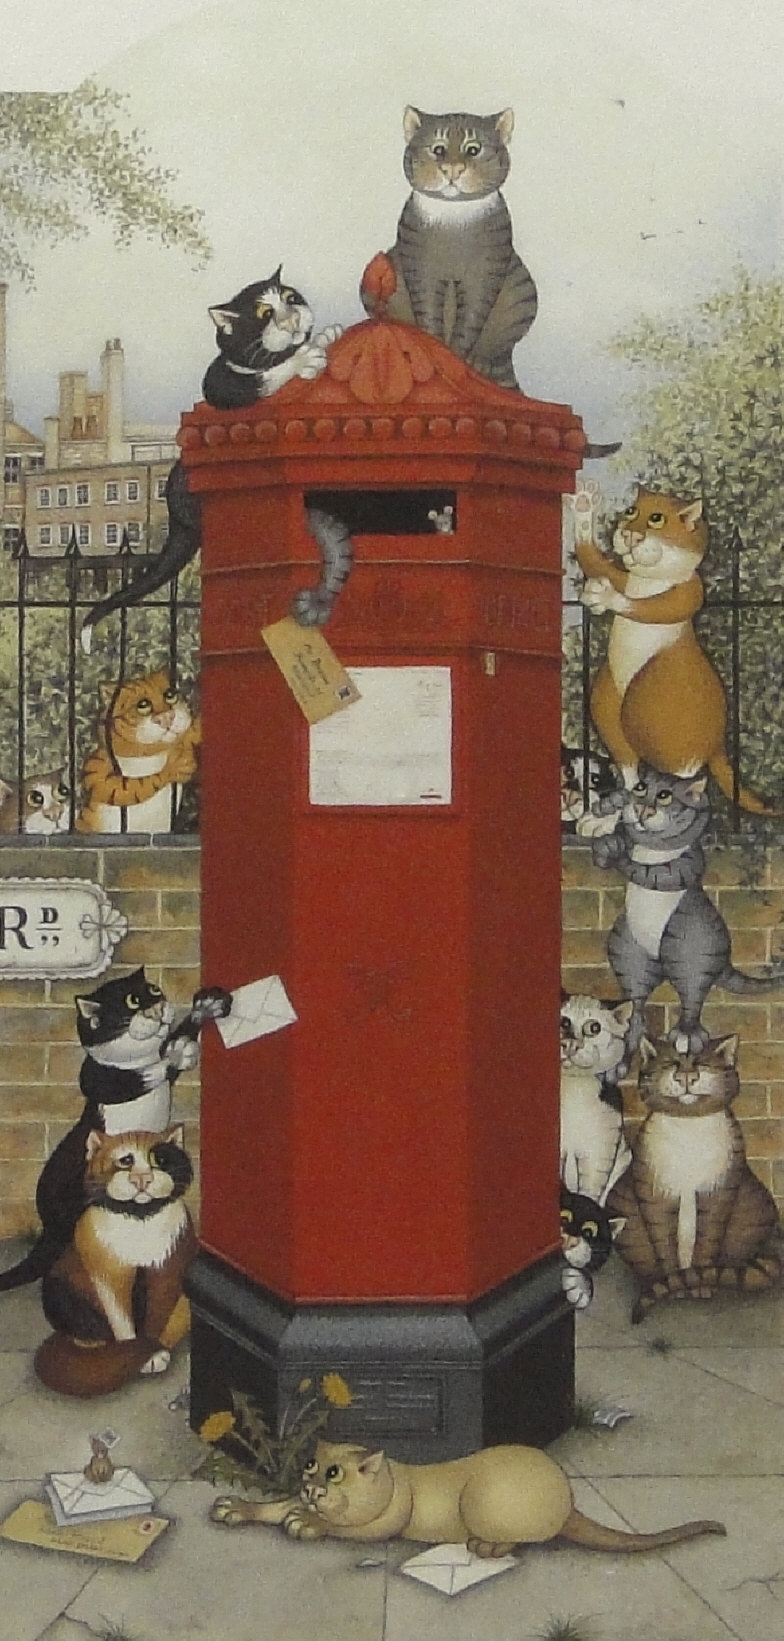 Linda Jane Smith - First Class Cats - Limited edition lithograph numbered 287/395 and pencil signed by Linda Jane Smith